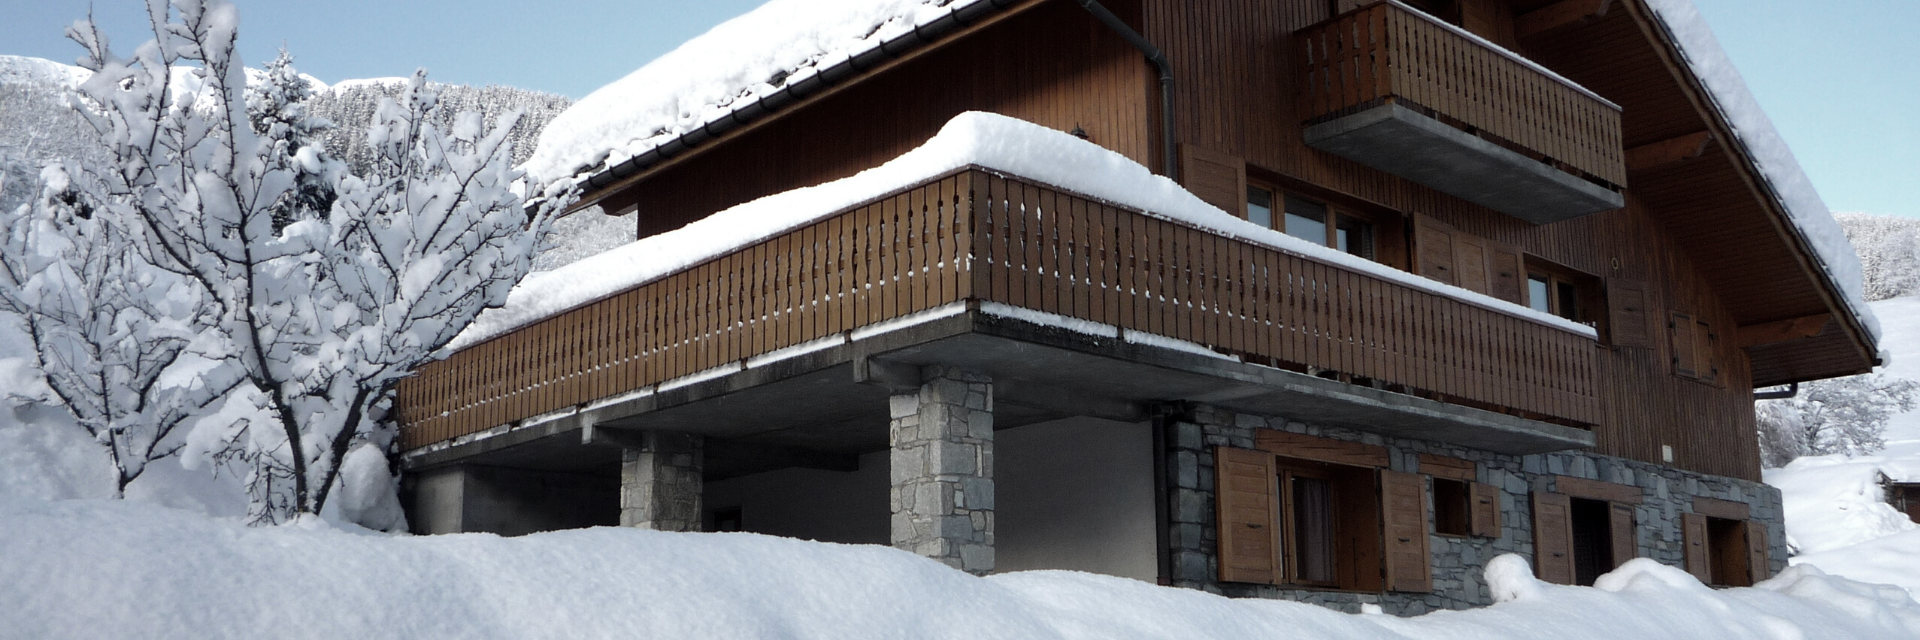 Affordable chalets in one of the worlds top ski resorts.